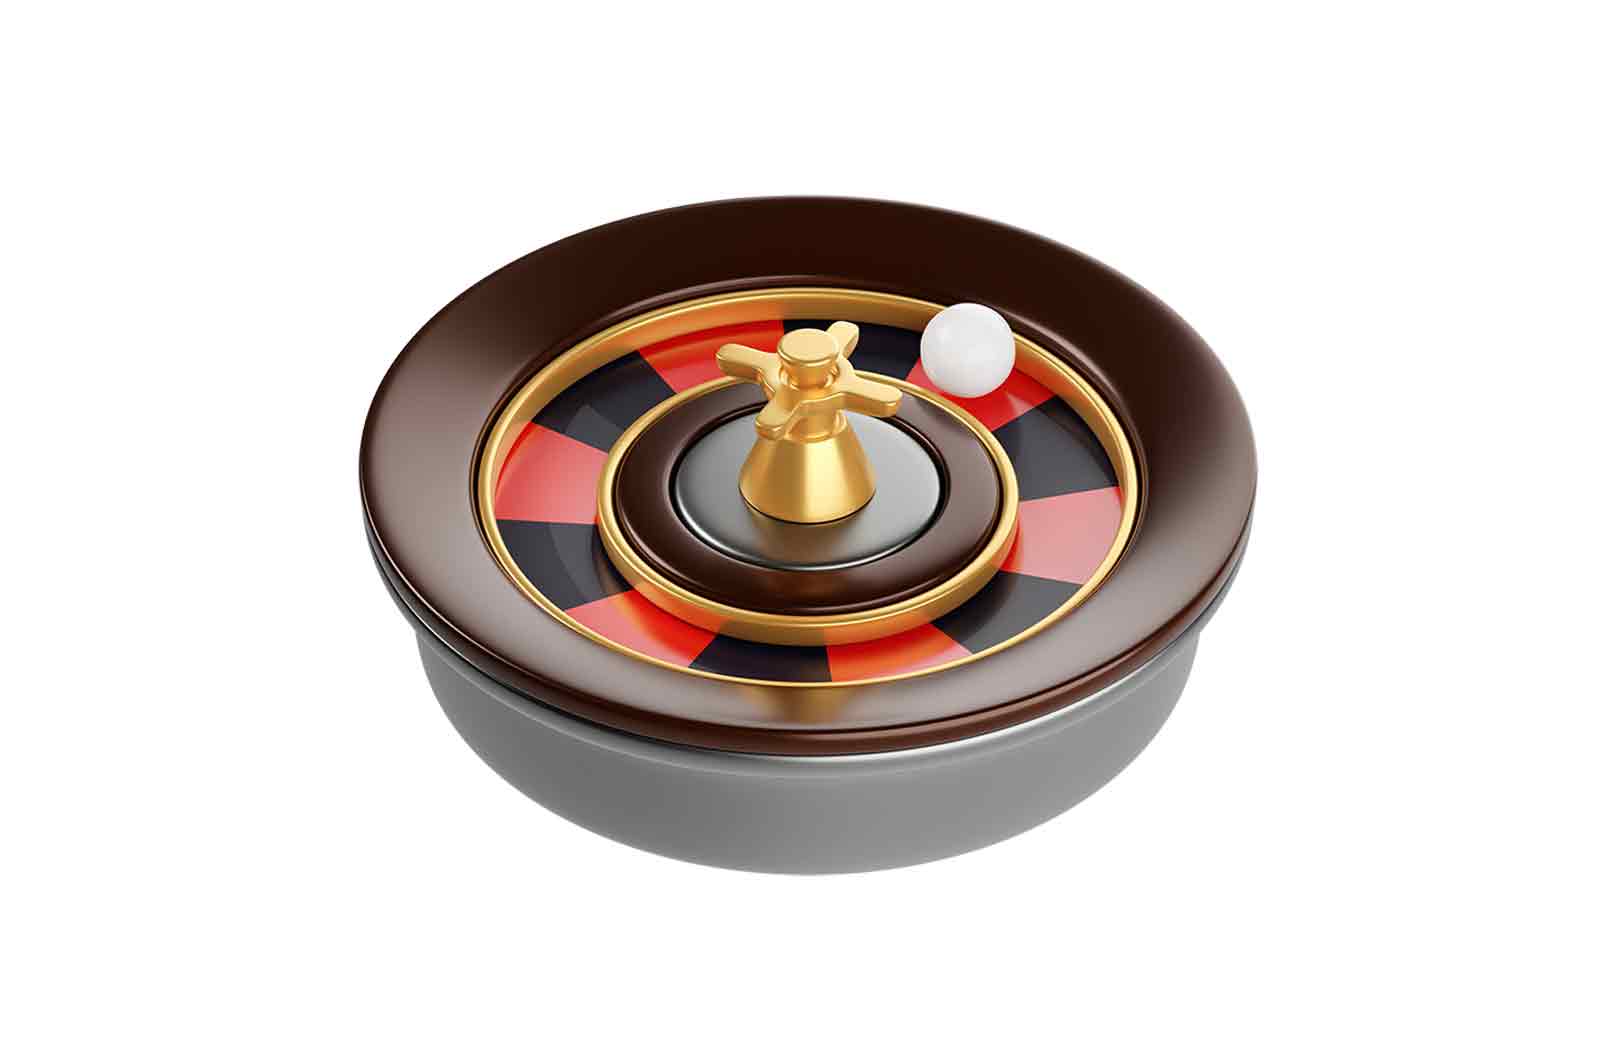 Roulette Wheel, 3D Rendered Illustration of a brown wheel with a gold handle and red and black sections with numbers. The image shows a white ball on the wheel, indicating the outcome of a spin. The image represents gambling, casino, and luck.